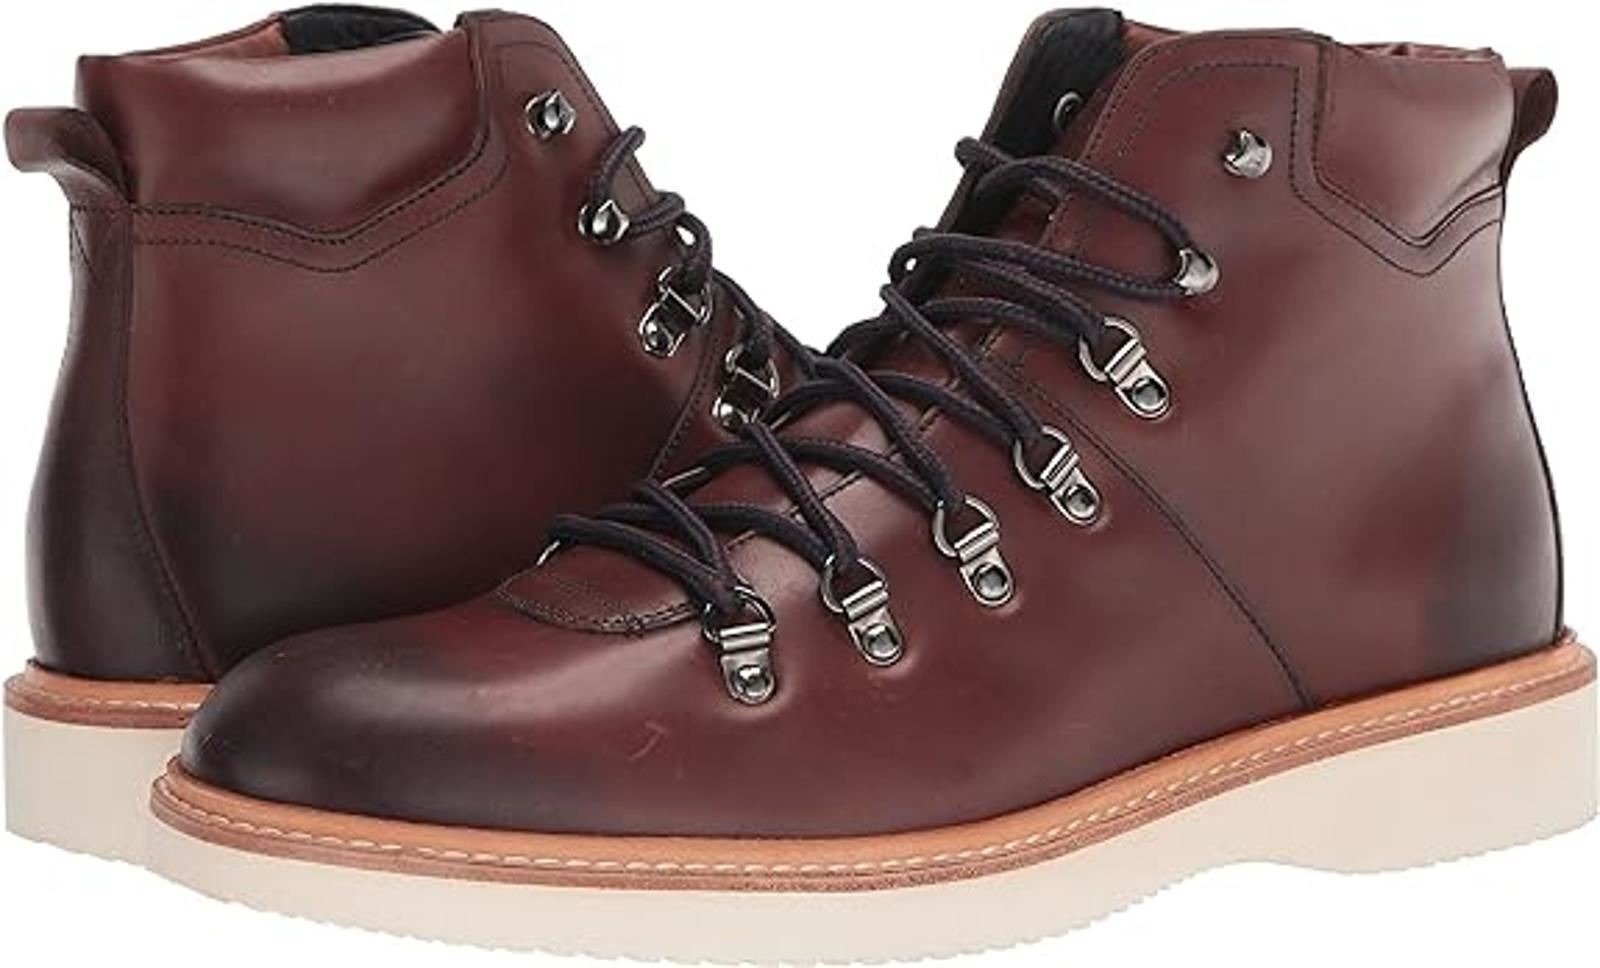 TED BAKER Liykere Men's Brown Leather Round Toe Hiker Boots